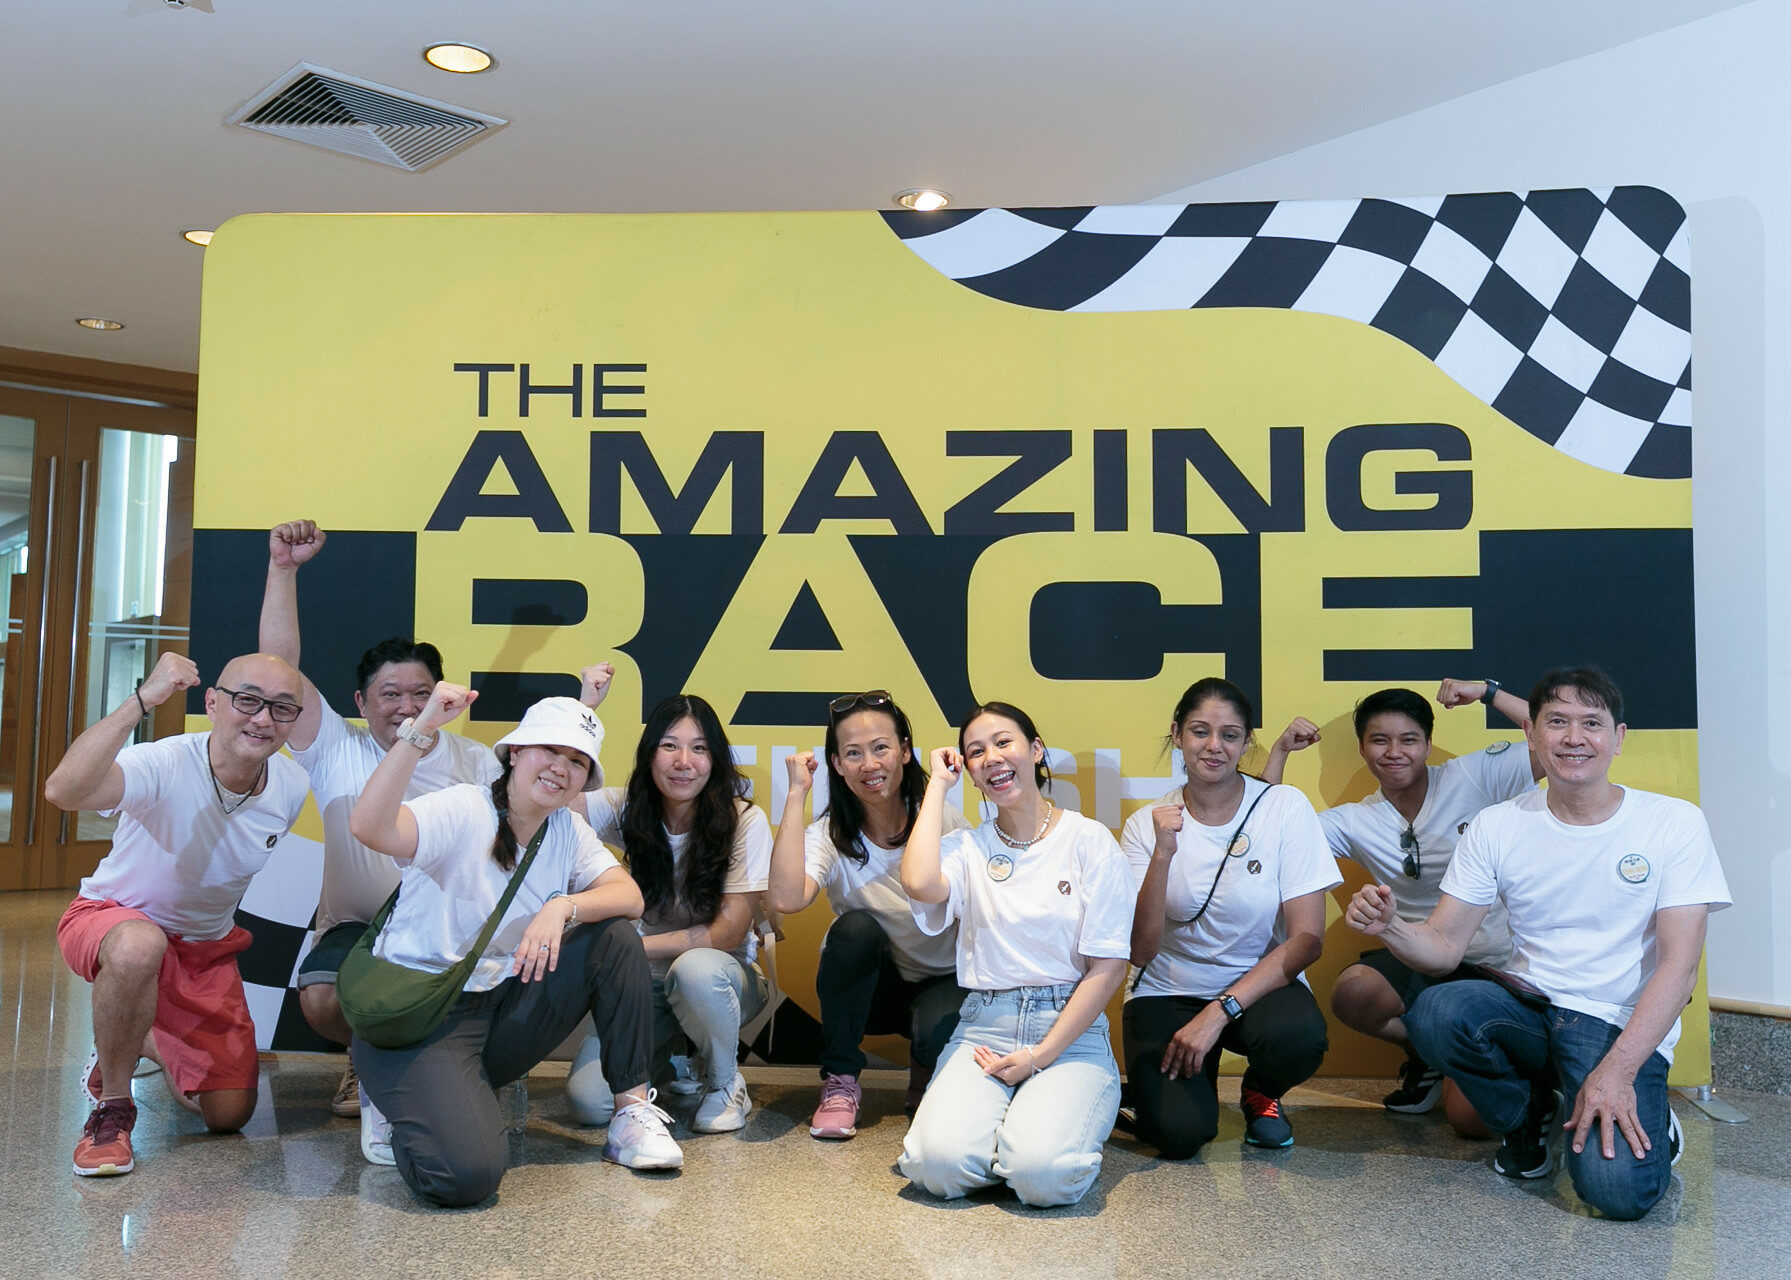 A race by minivans or public transport from challenge to challenge based on the famous TV-show The Amazing Race